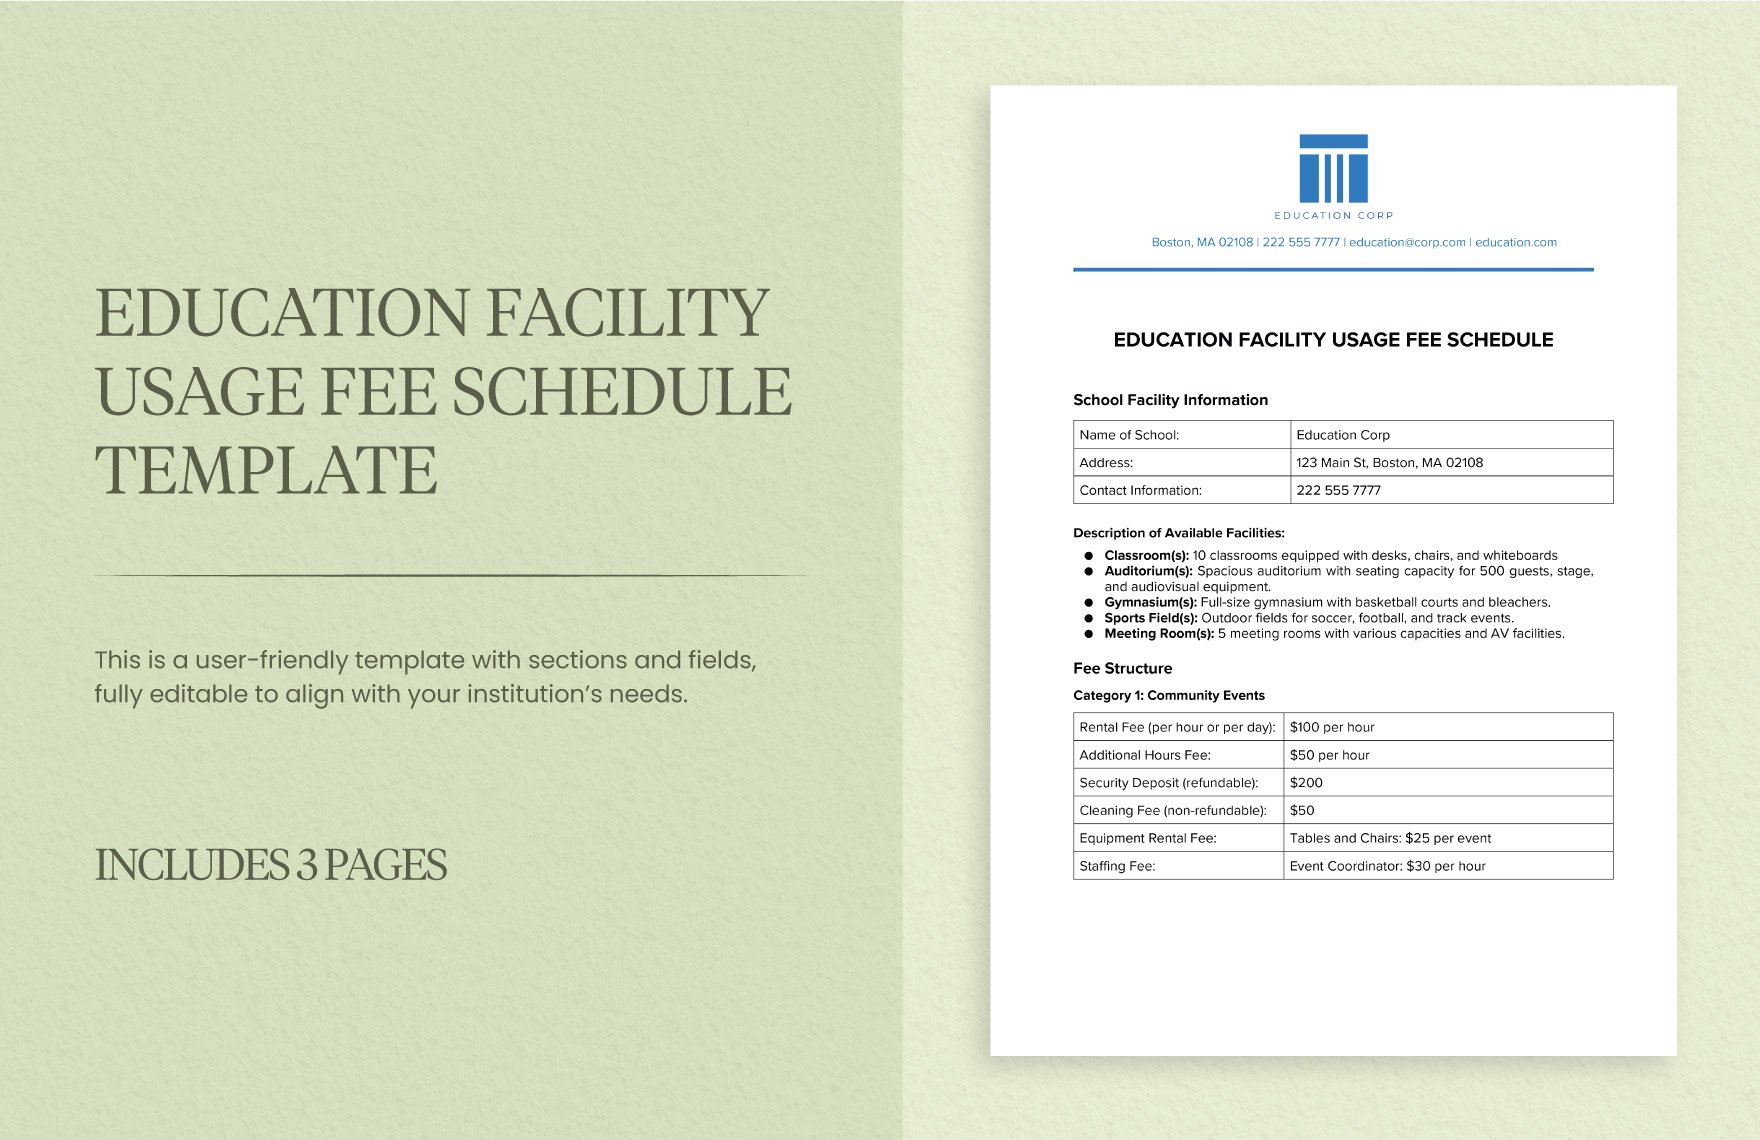 Education Facility Usage Fee Schedule Template in Word, Google Docs, PDF